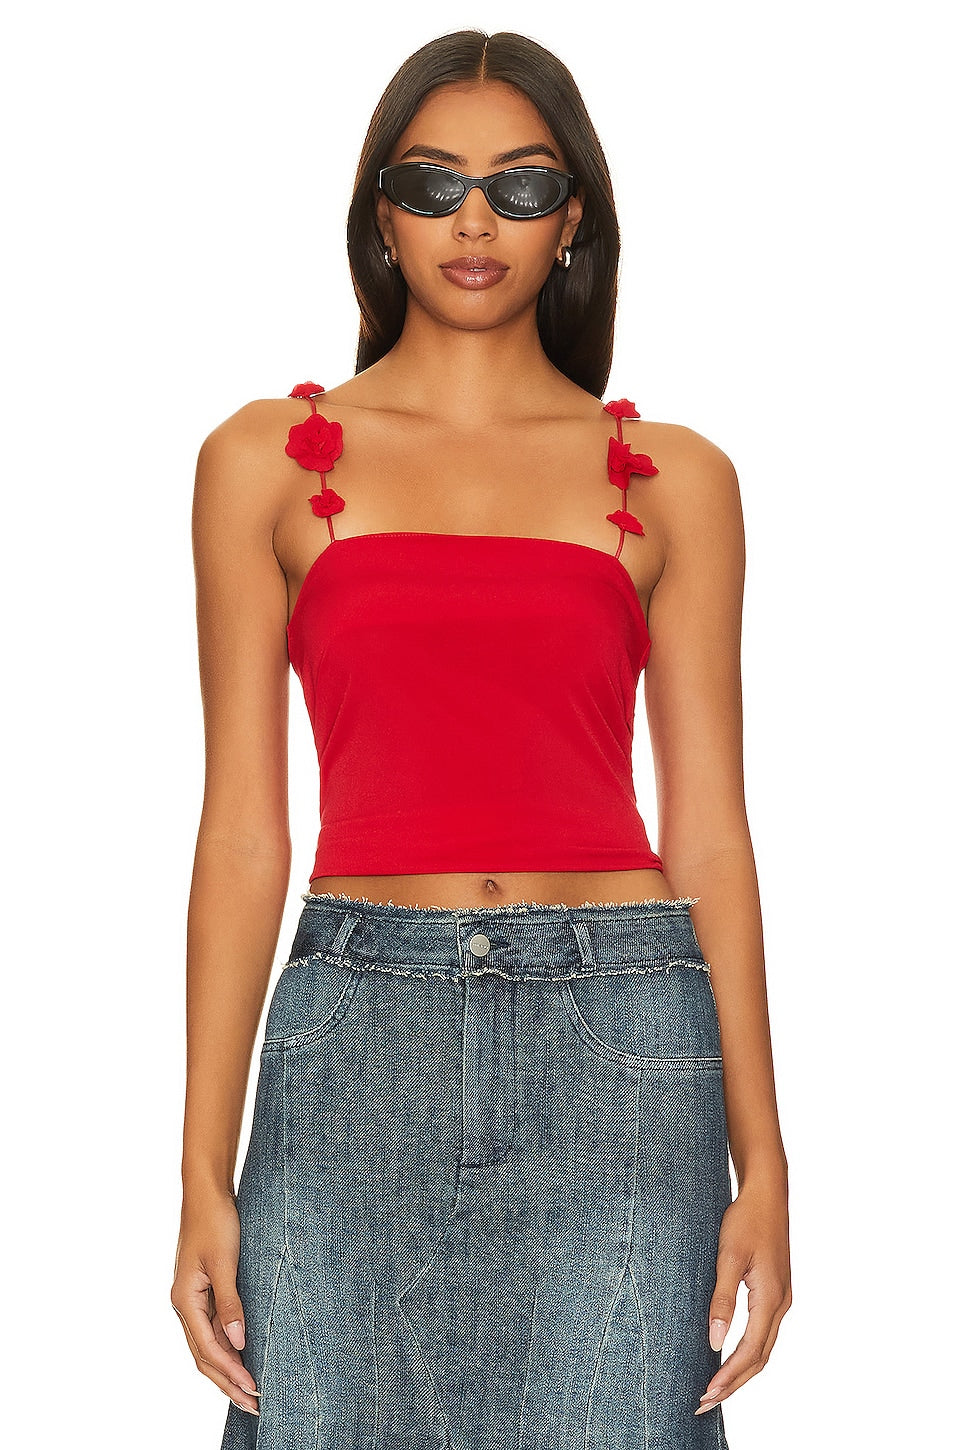 Musier Paris Nuovo Top With Flower Straps in Red Size 36